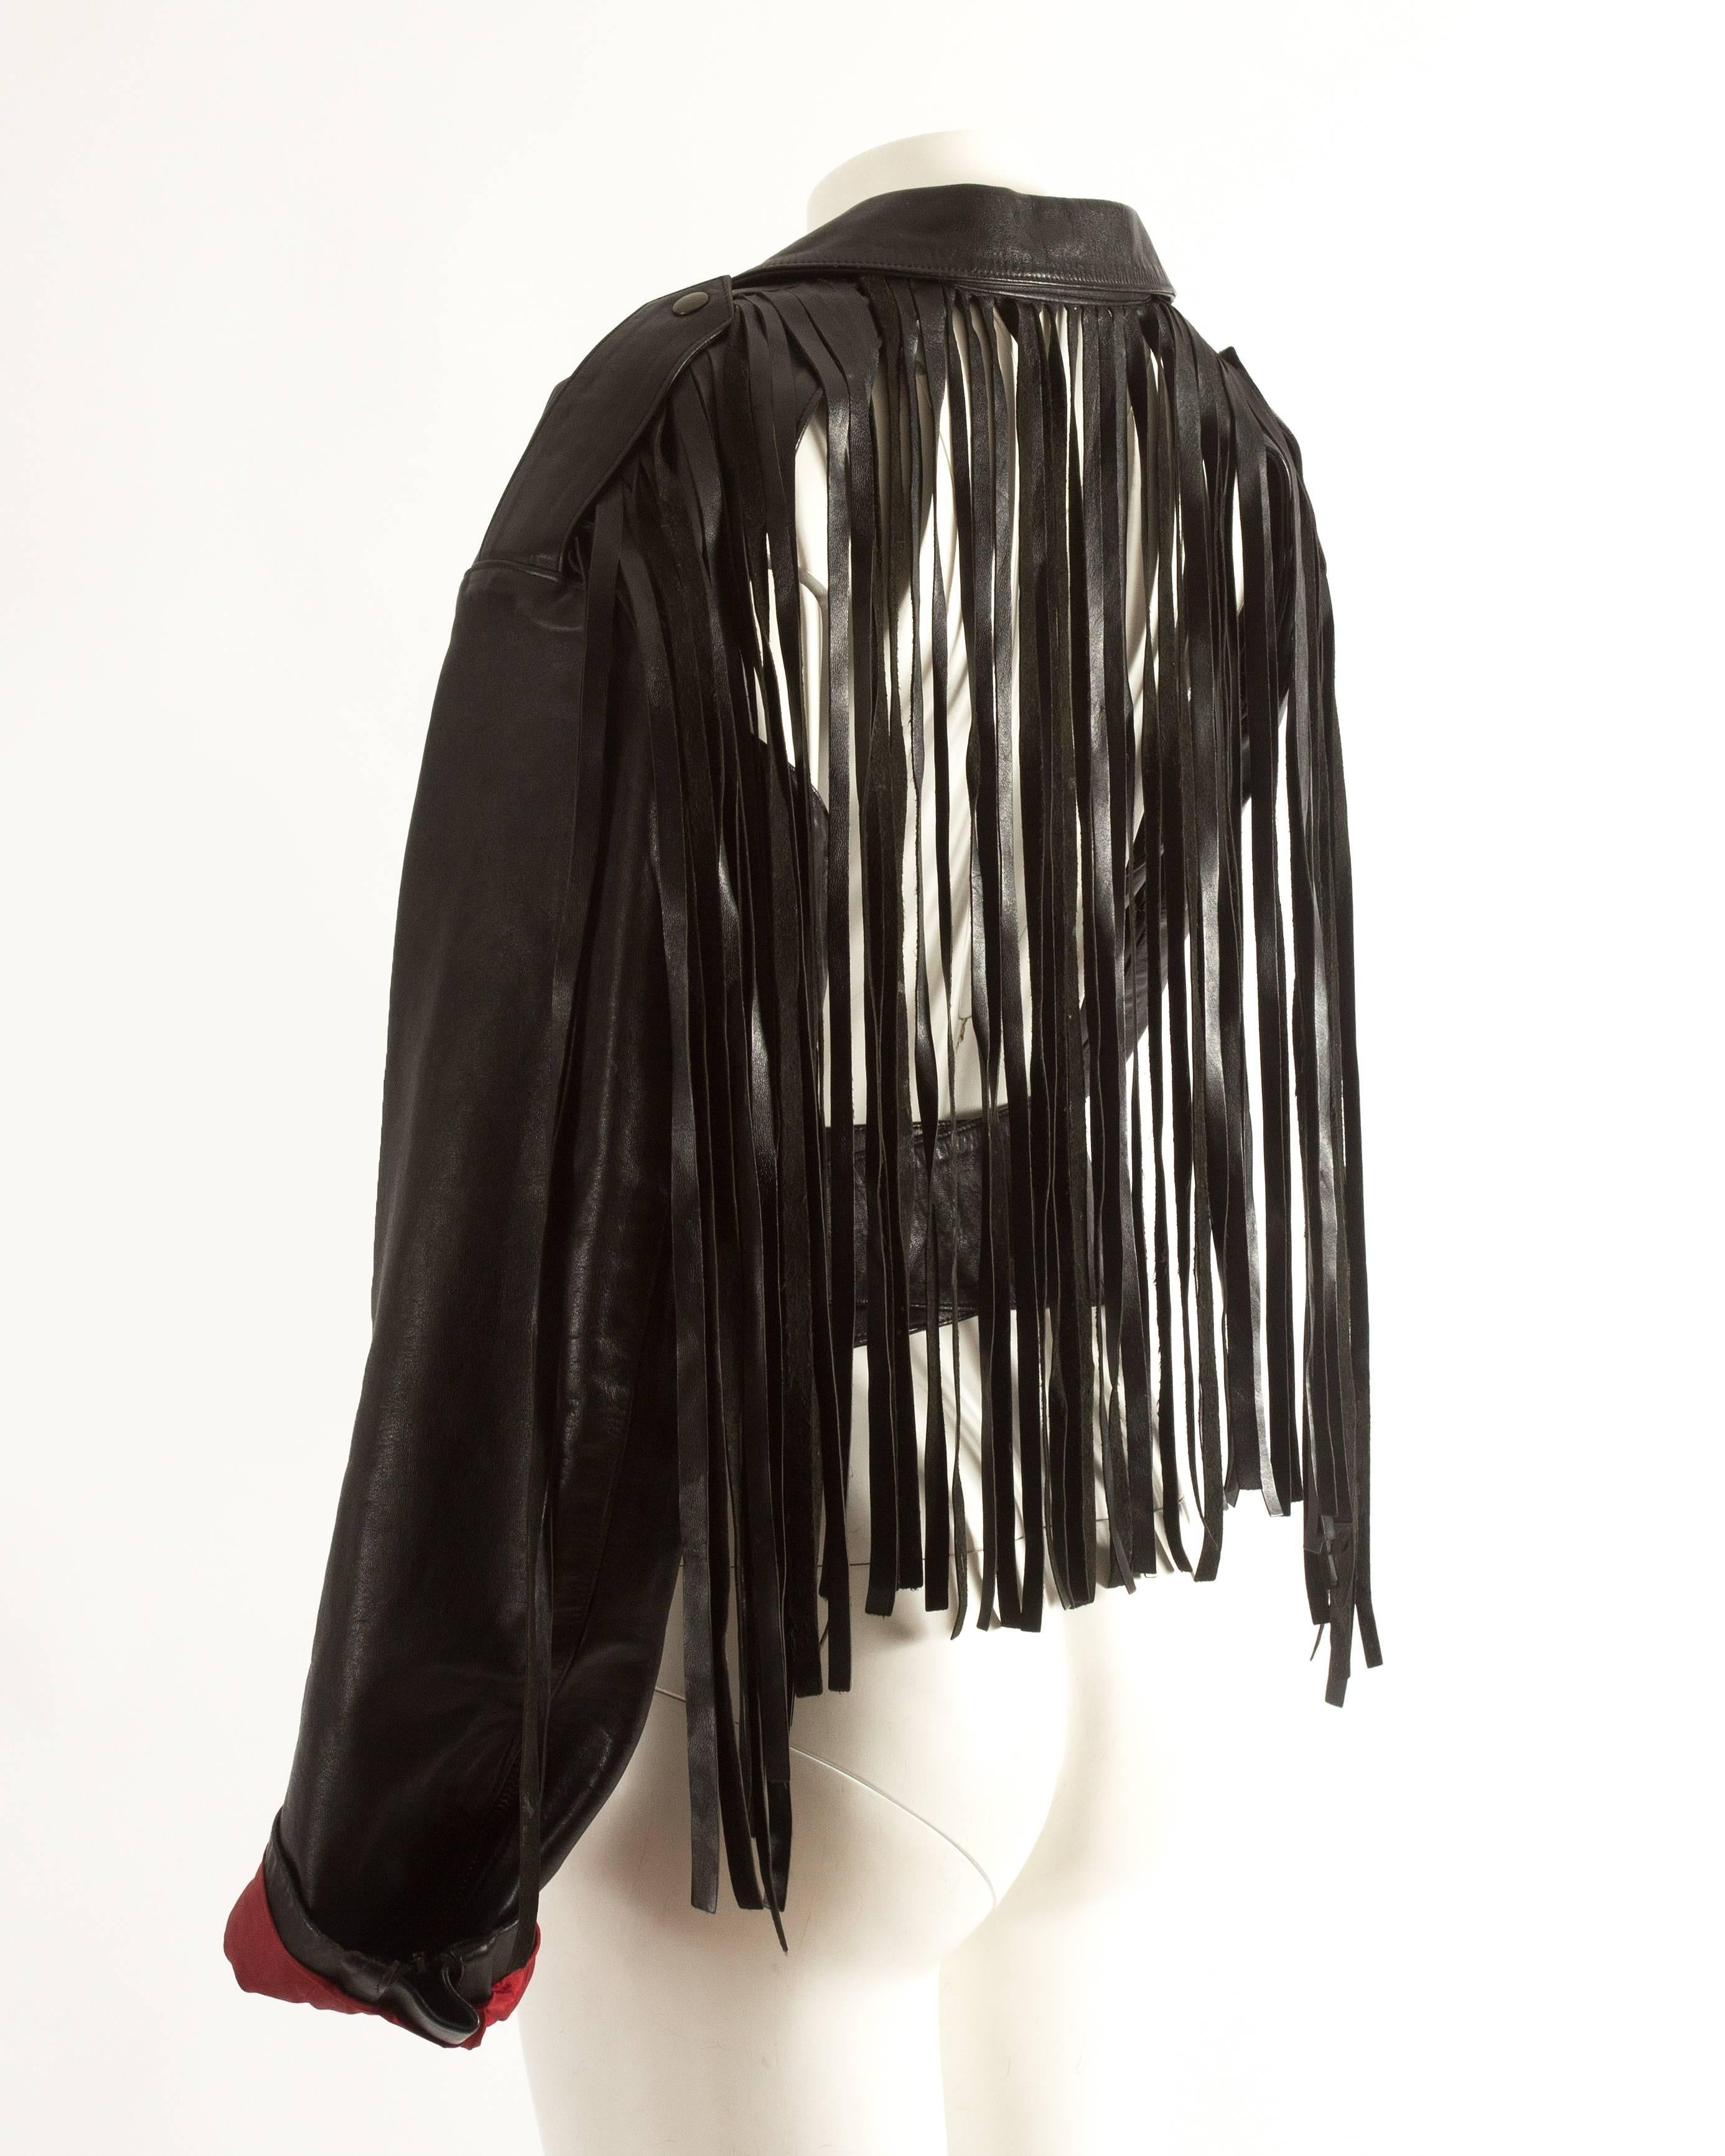 Jean Paul Gaultier Spring-Summer 1985 fringed leather jacket with open back  1